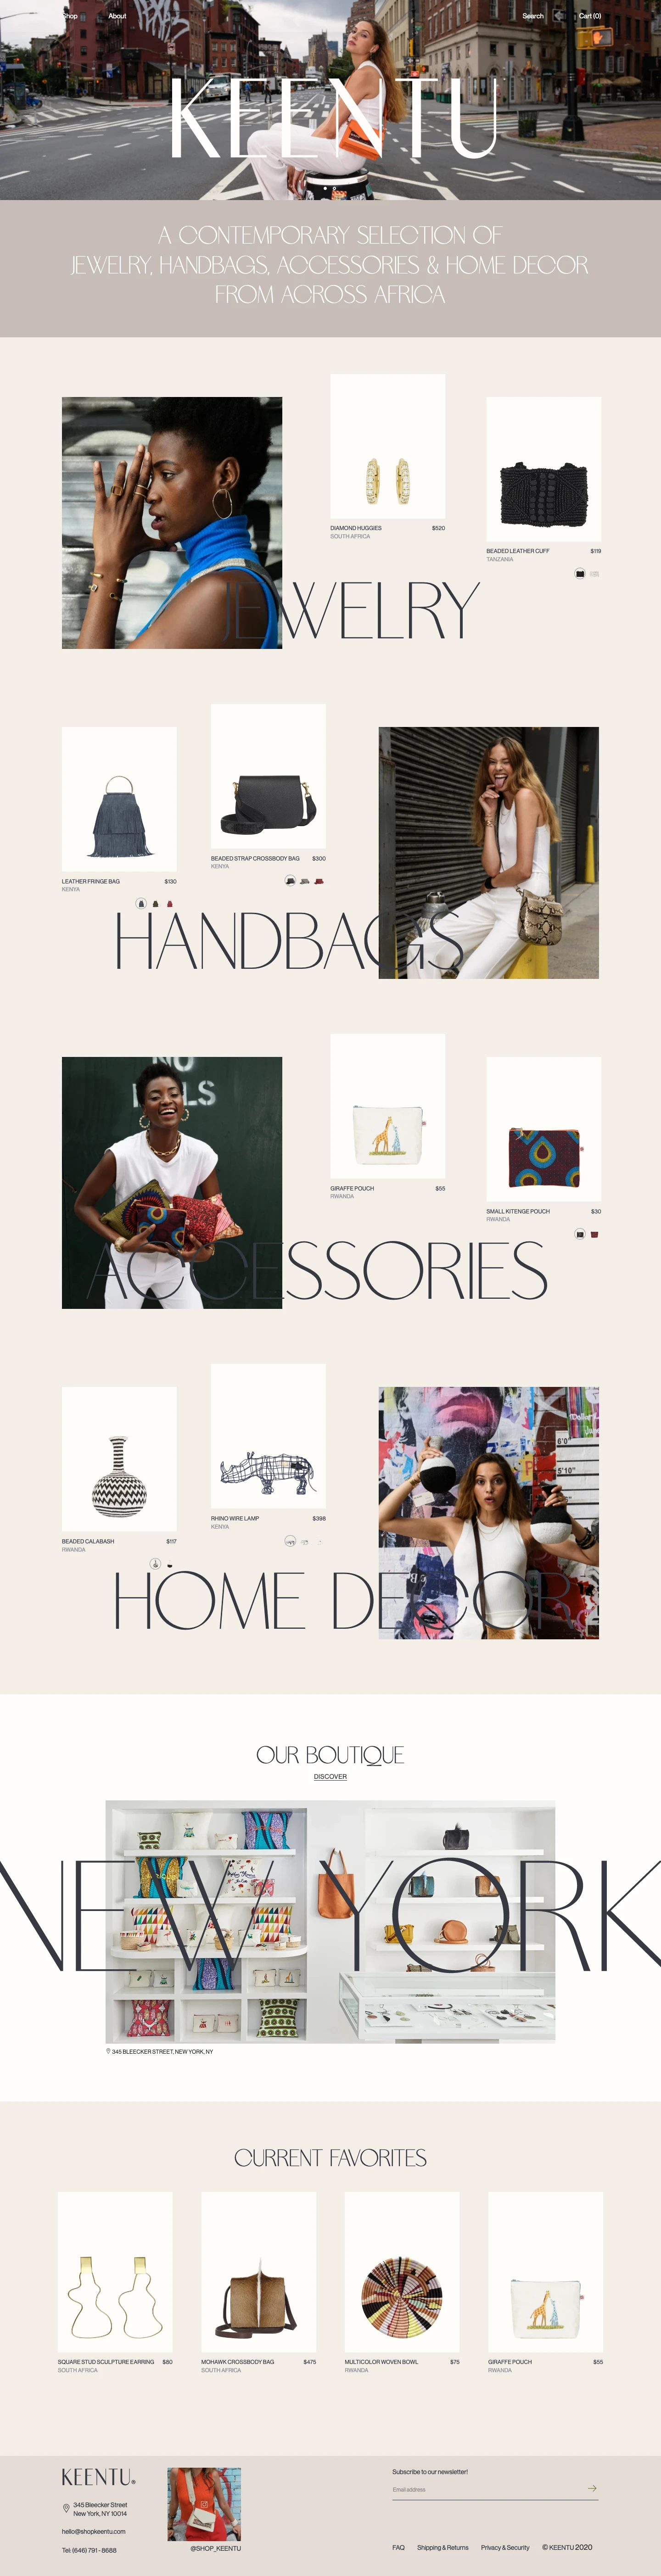 KEENTU Landing Page Example: Contemporary Selection of Jewelry, Handbags, Accessories and Home Décor from Across Africa.